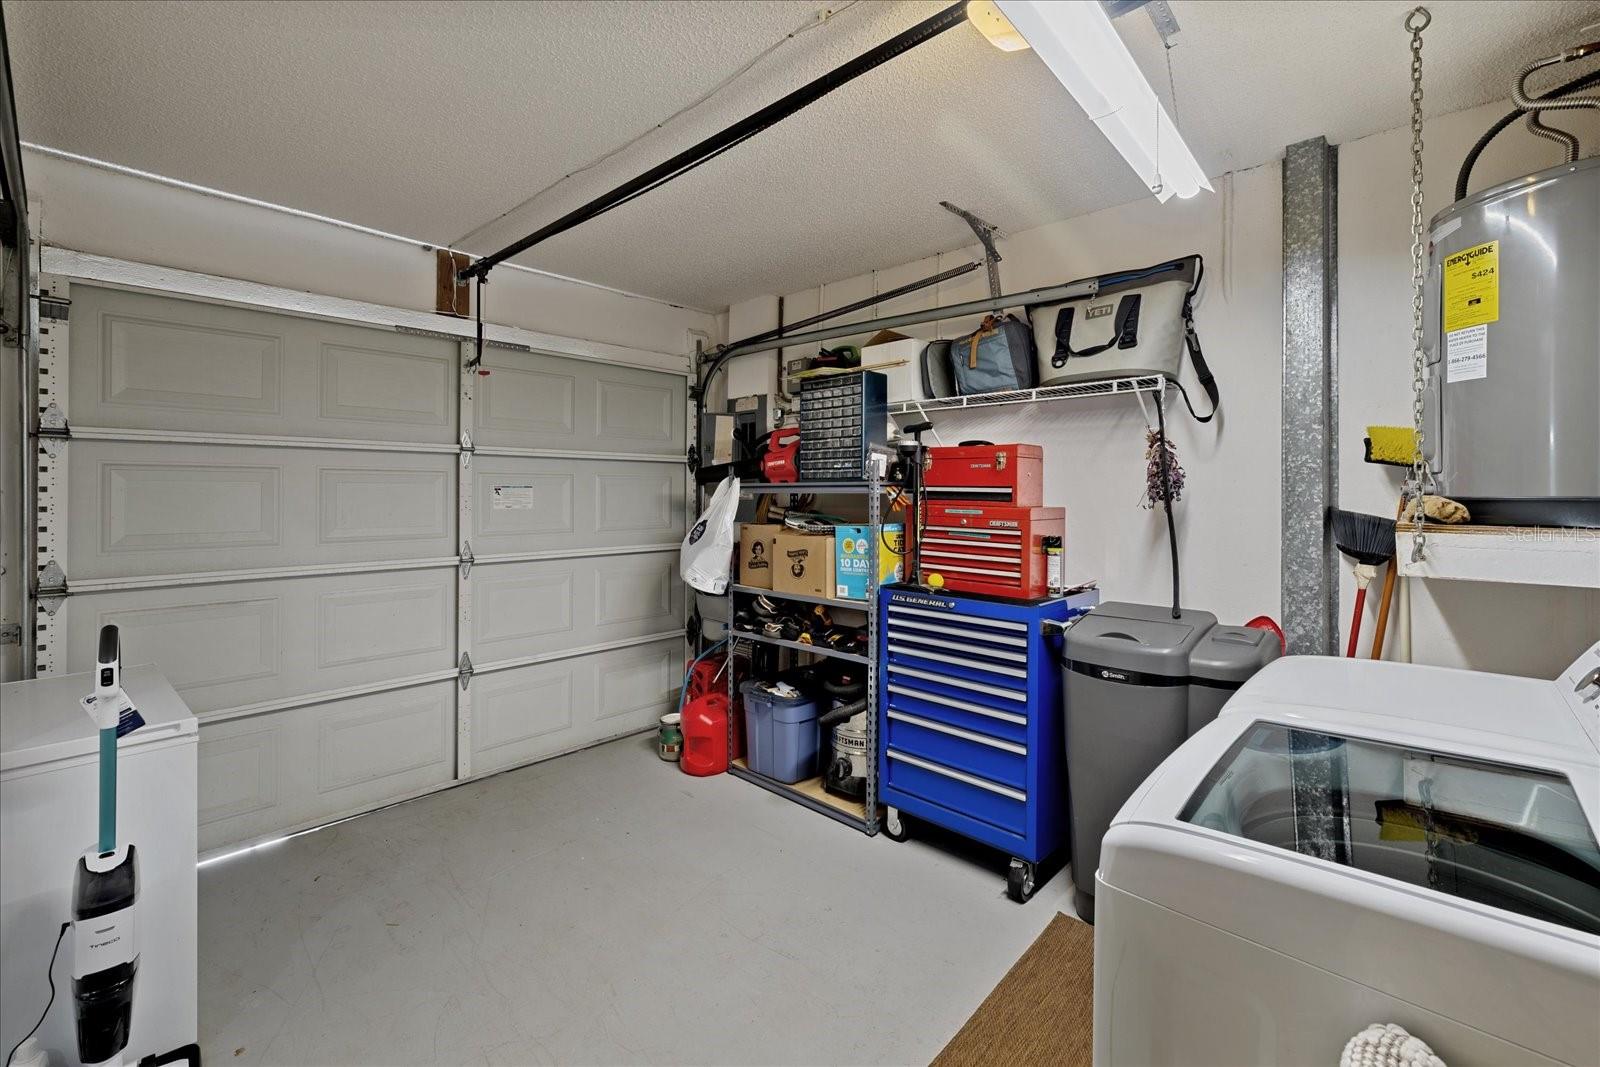 although the garage is on the smaller side, it offers the perfect amount of storage